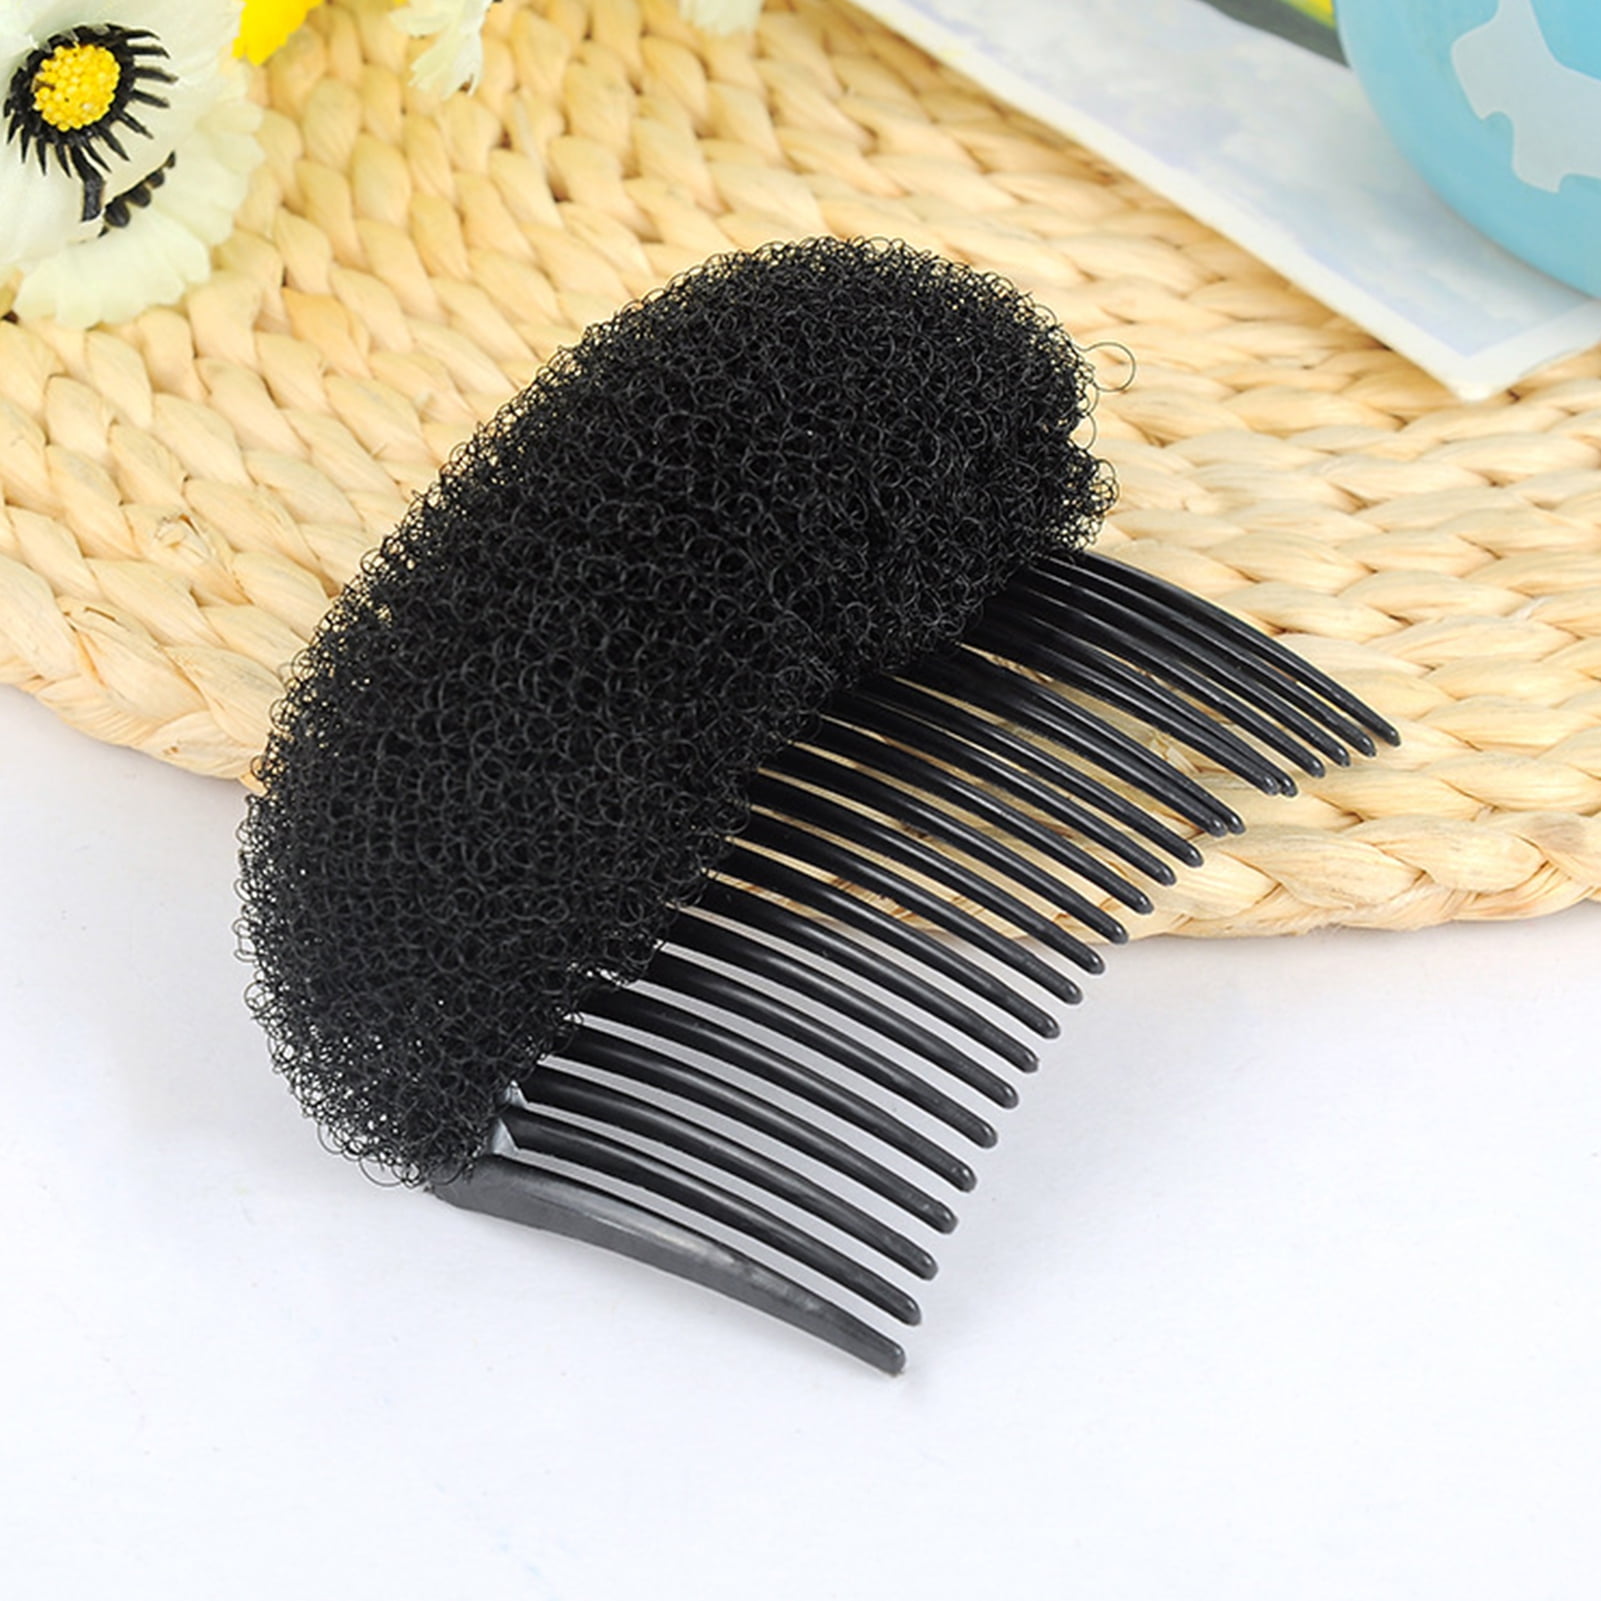 Aggregate more than 192 puff hairstyle accessories latest